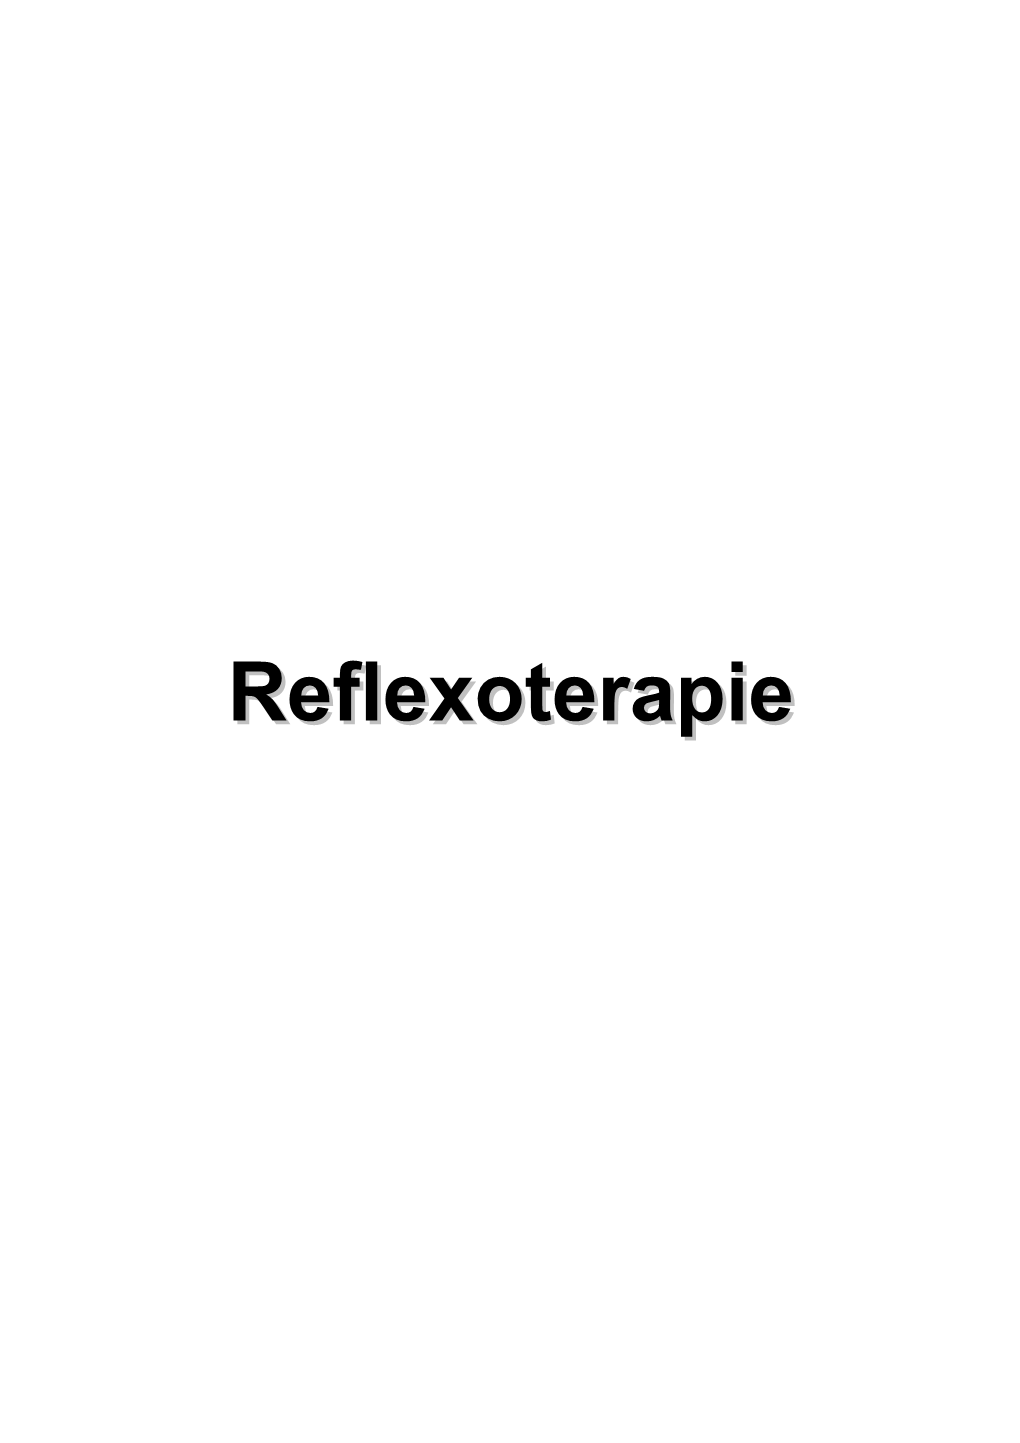 What Benefits Does Reflexology Provide?